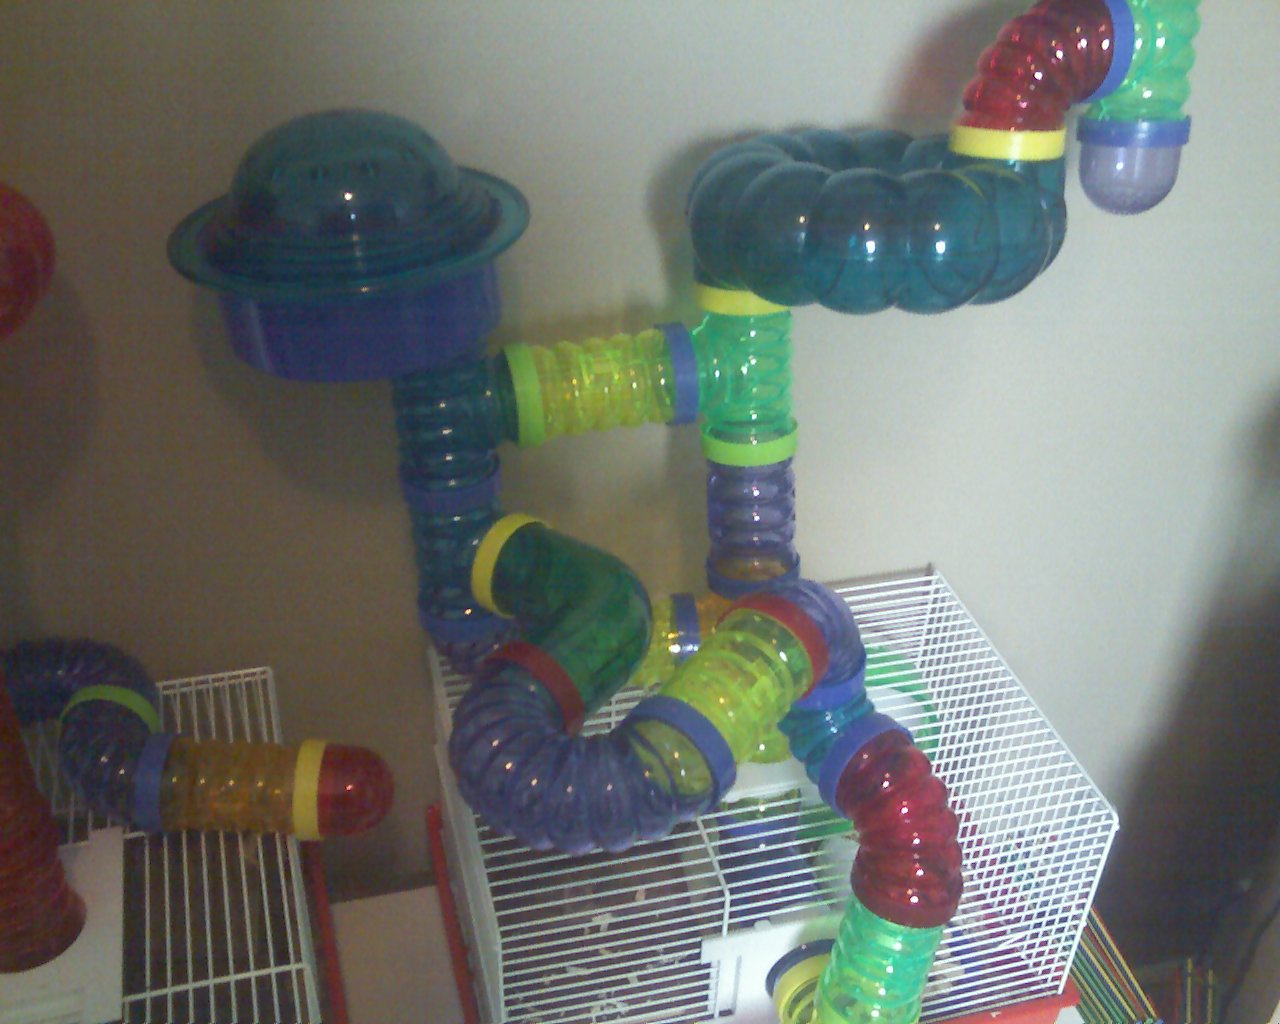 Another Picture Of Remmy's Cage